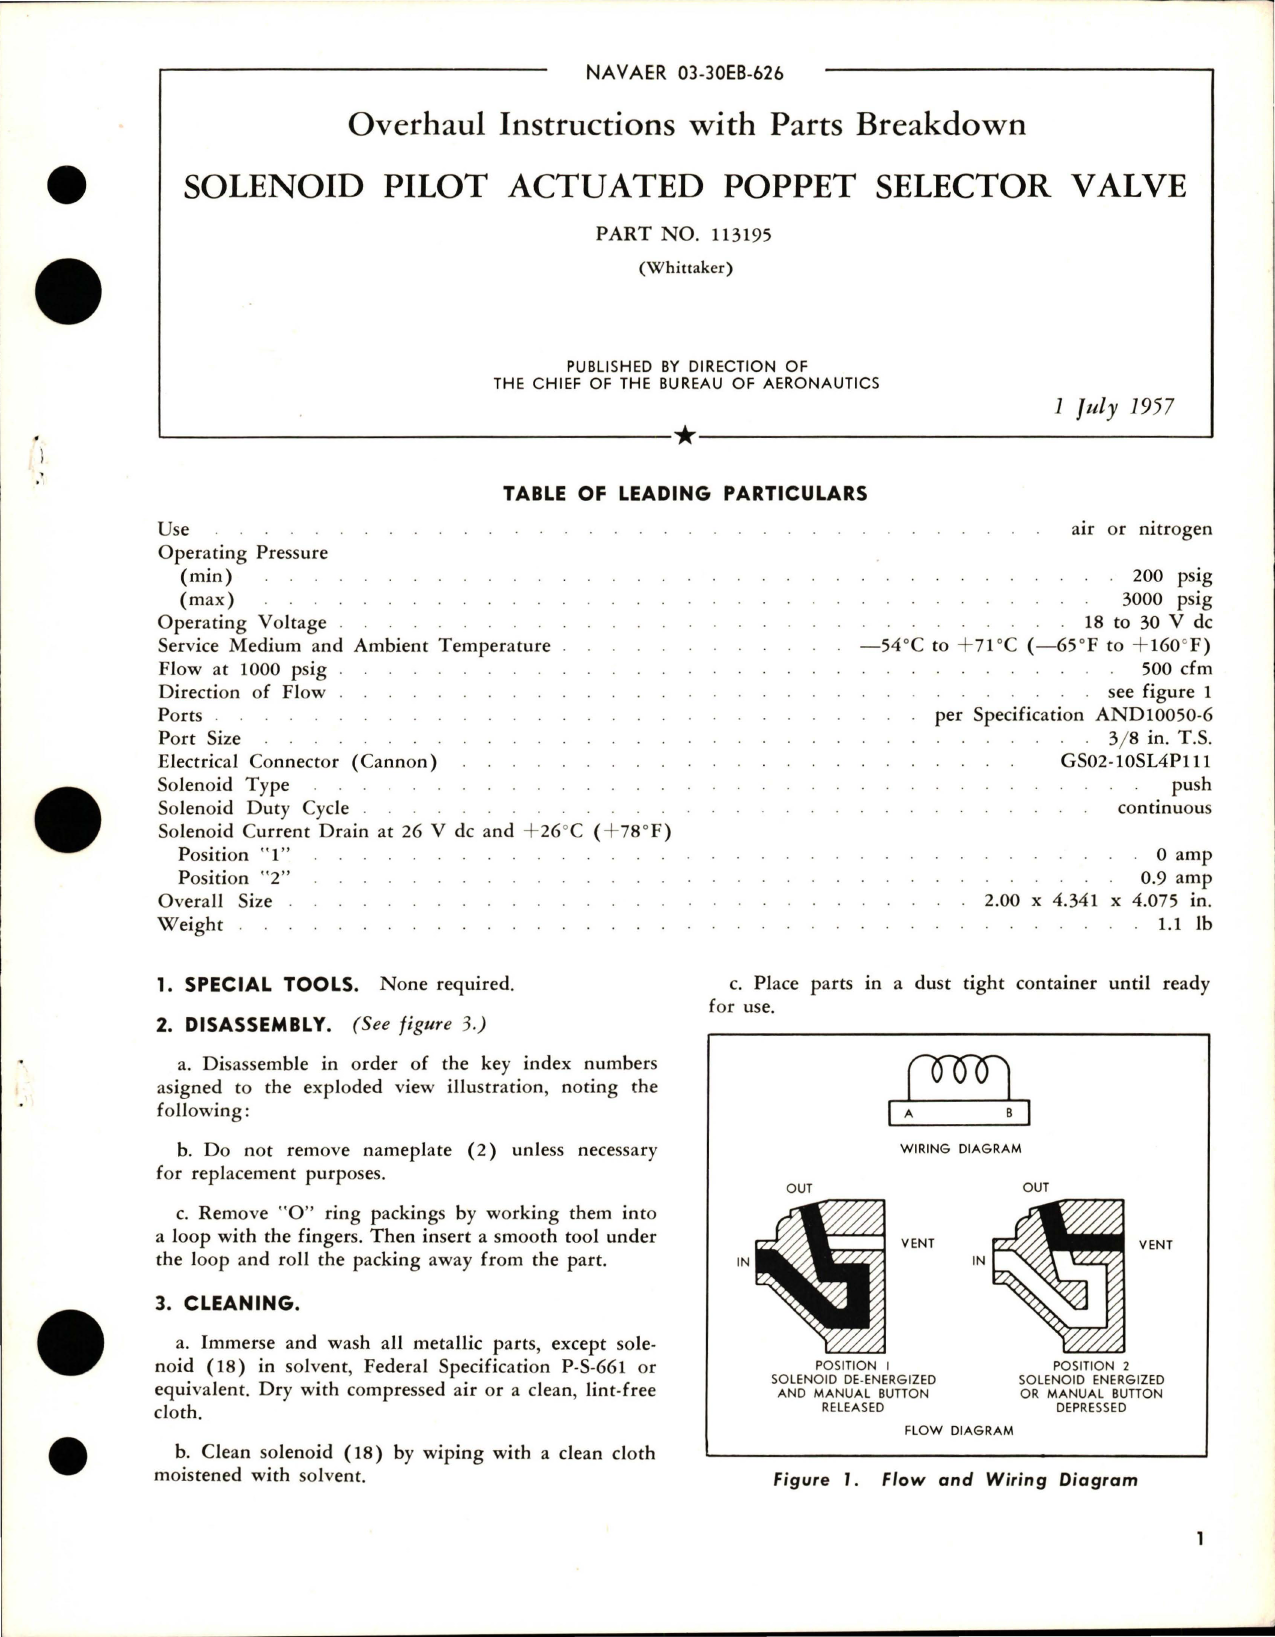 Sample page 1 from AirCorps Library document: Overhaul Instructions with Parts for Solenoid Pilot Actuated Poppet Selector Valve - Part 113195